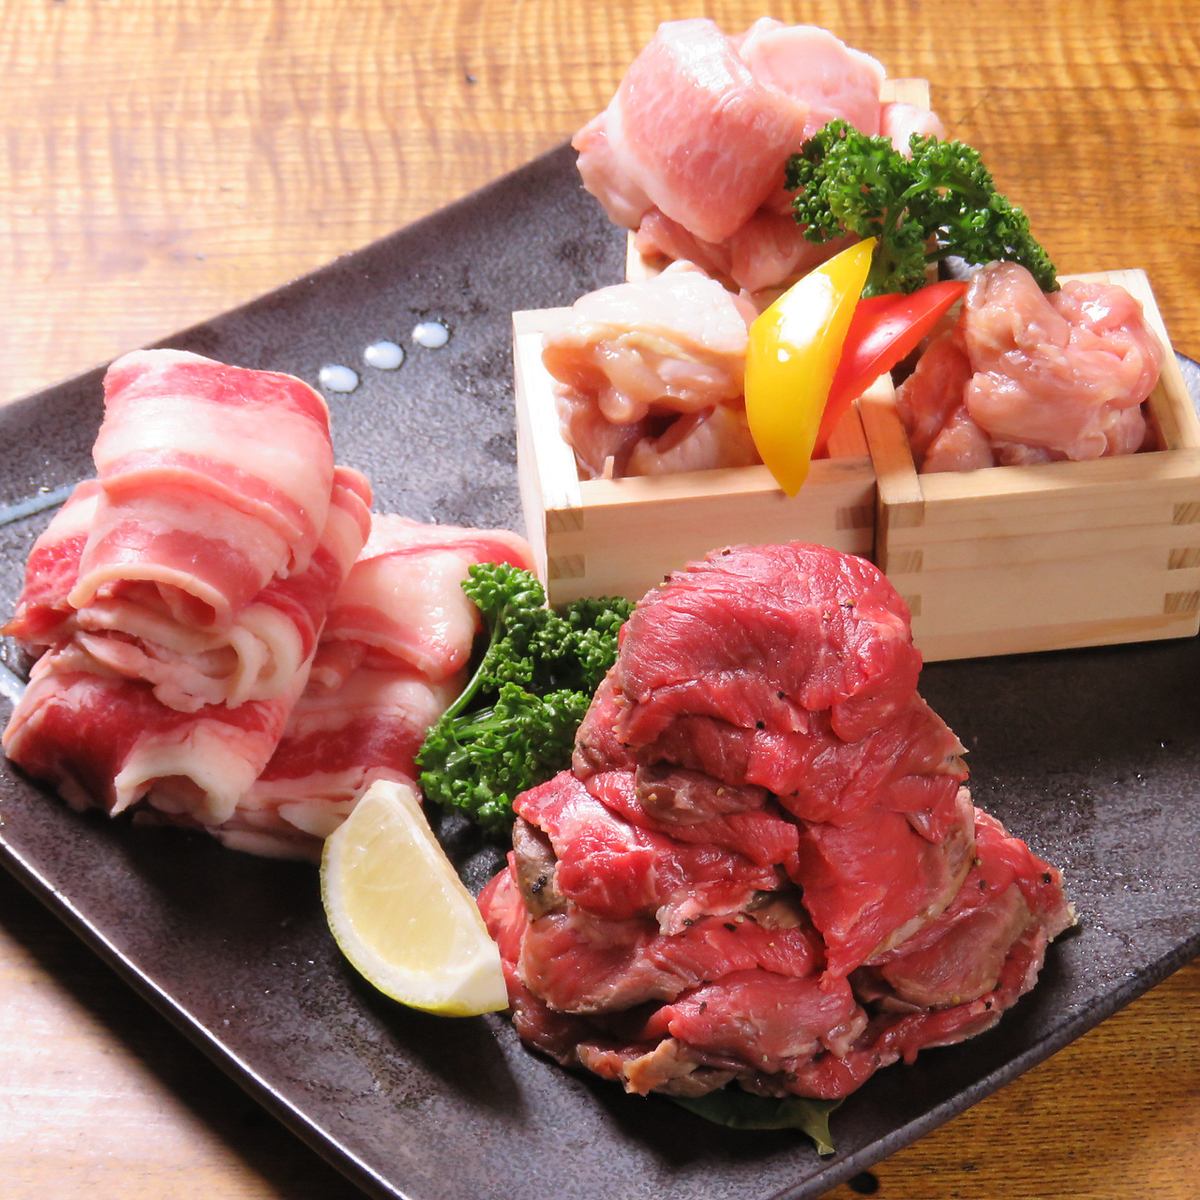 You can enjoy "Himalayan meat", which is a hot topic in the media! There is also a course ♪